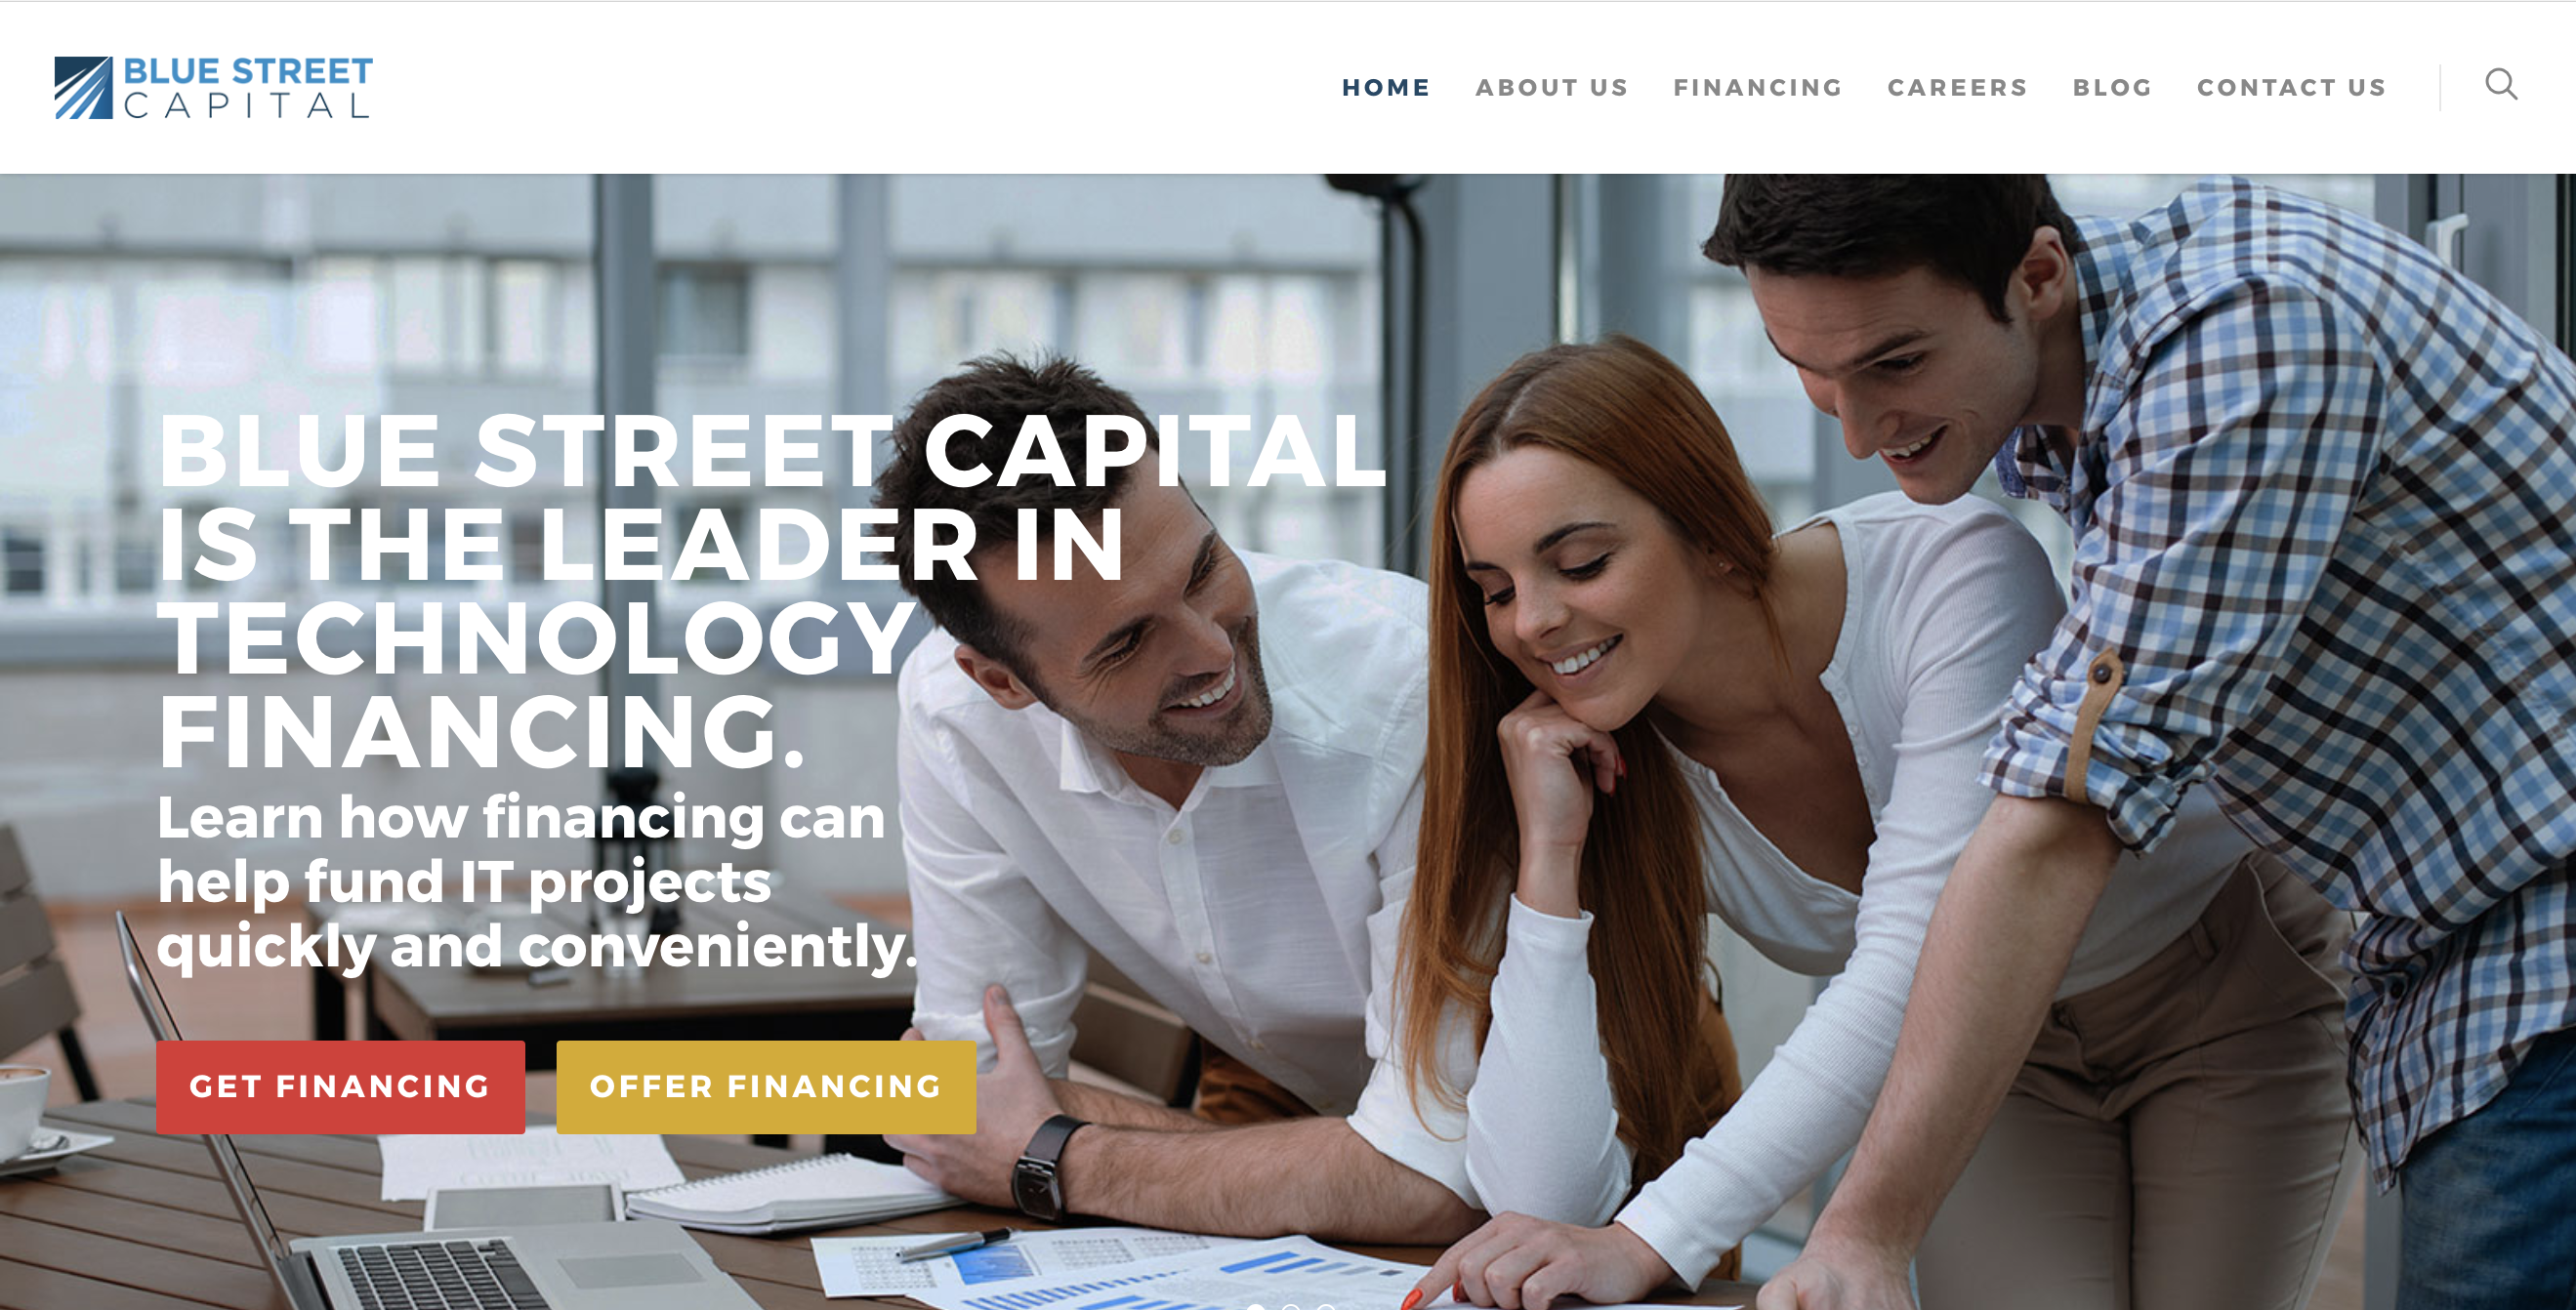 The Good Marketing Company has worked with Blue Street Capital